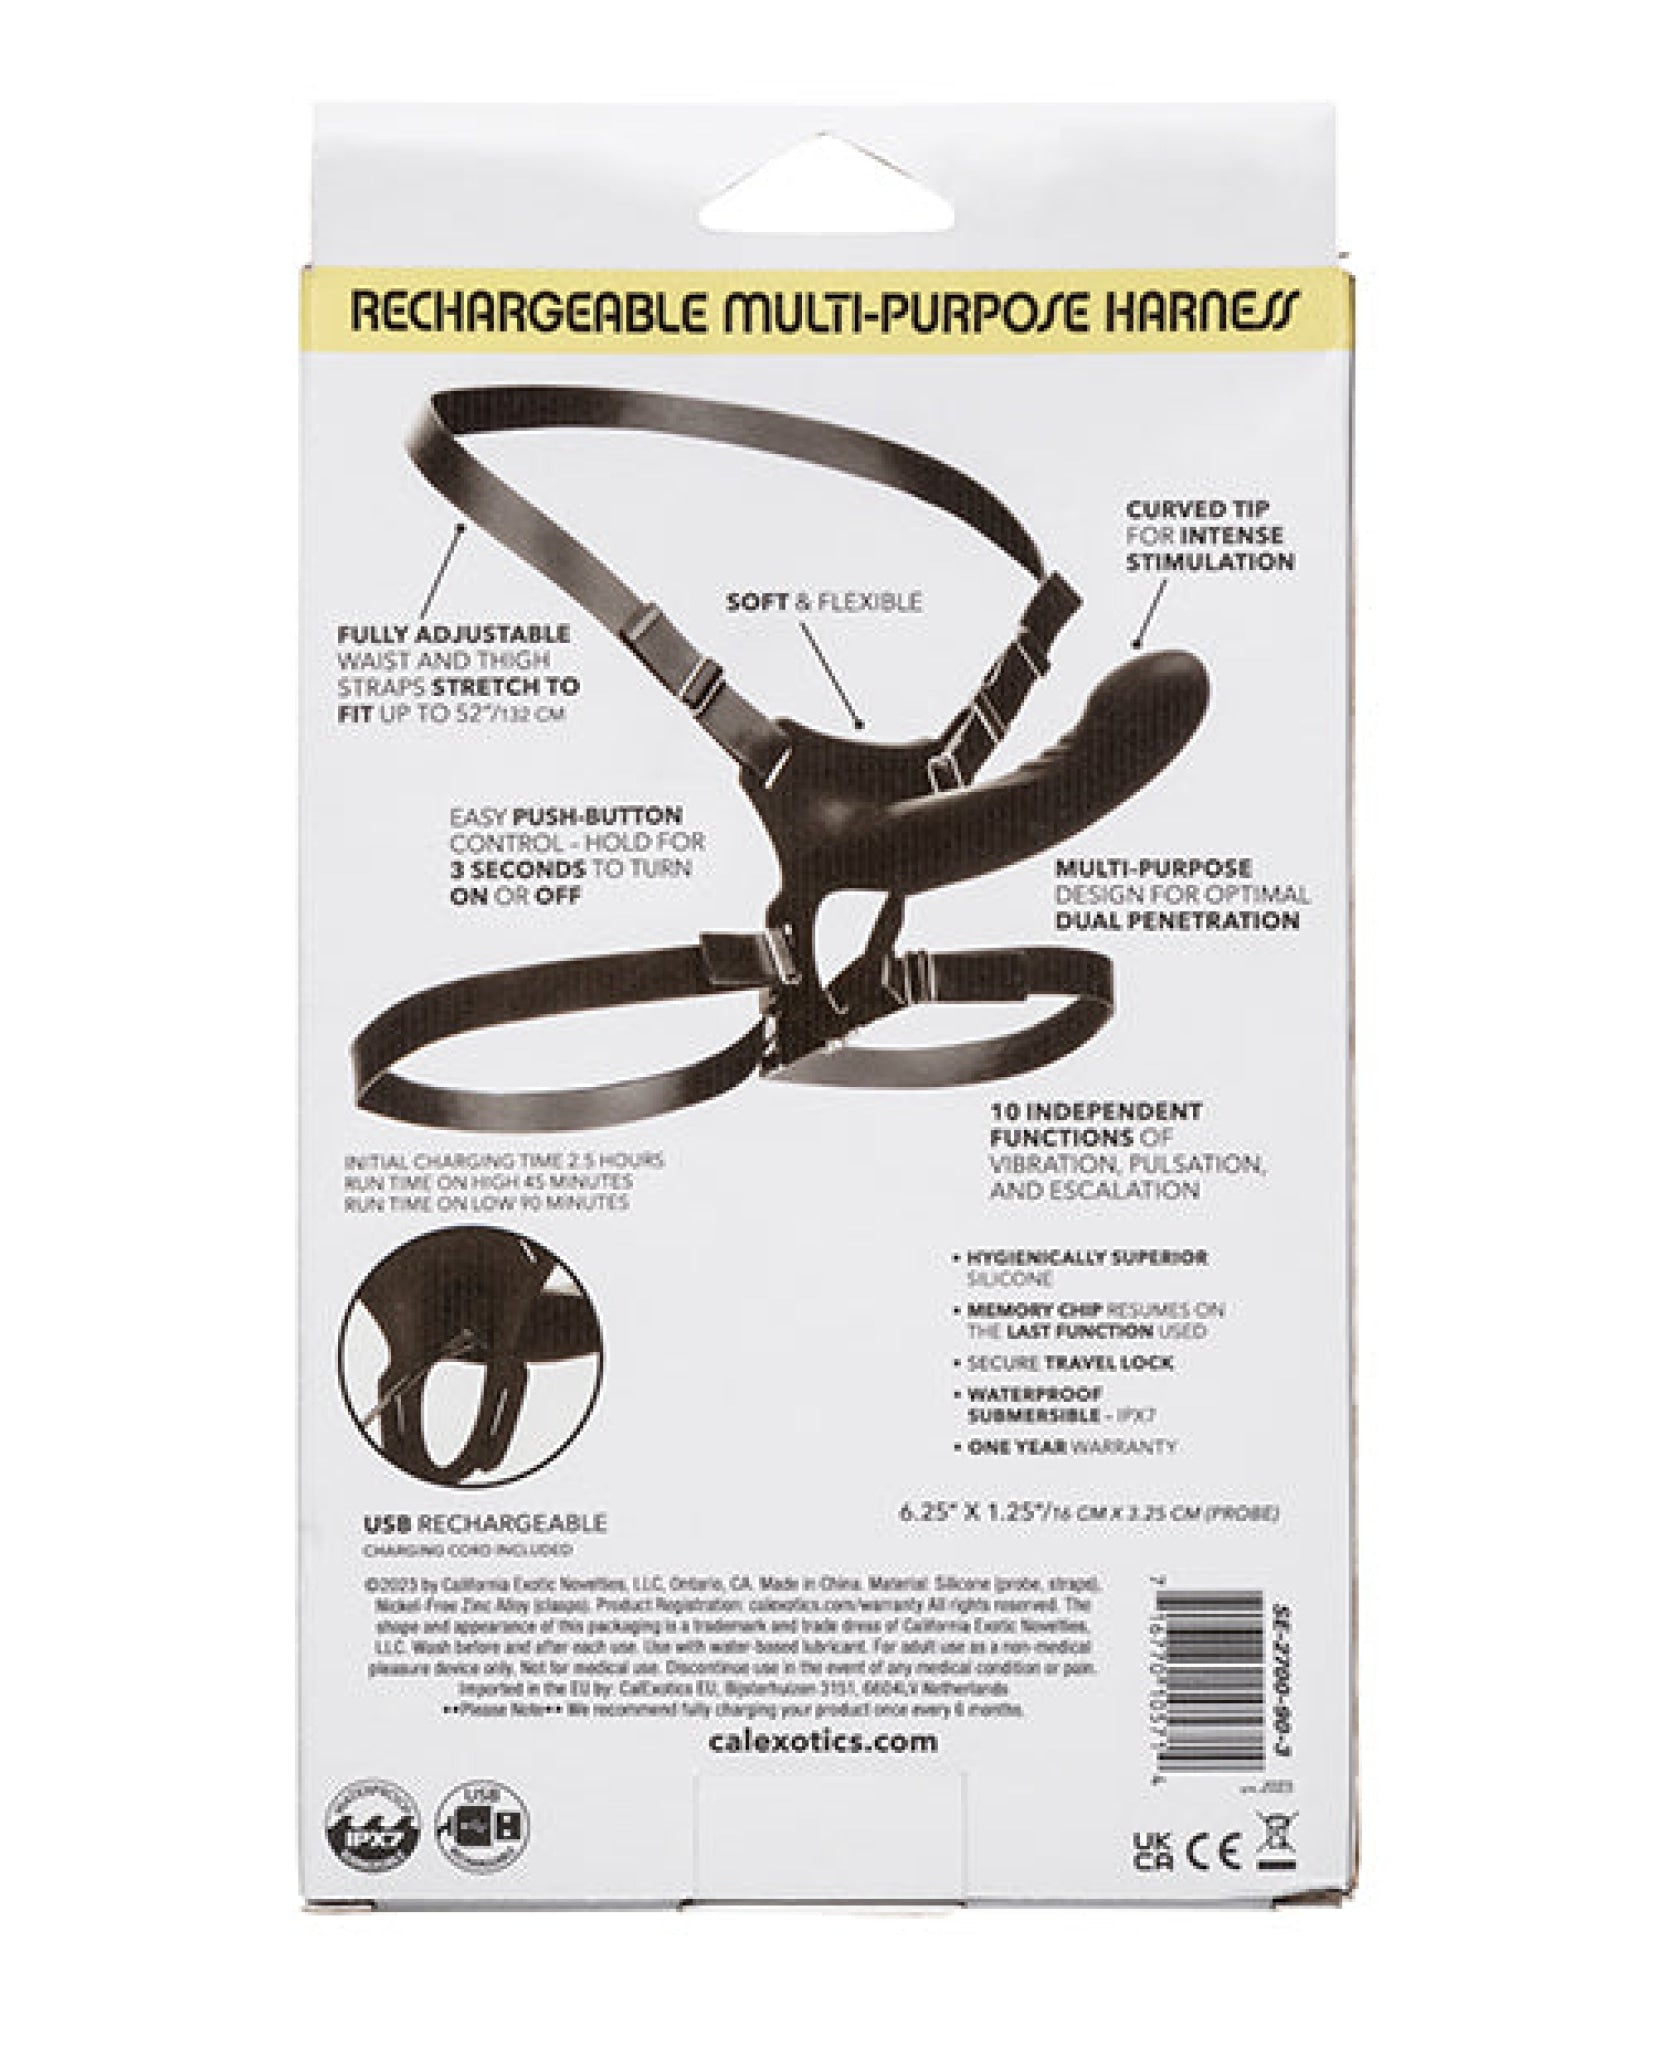 Boundless Rechargeable Multi-purpose Harness California Exotic Novelties